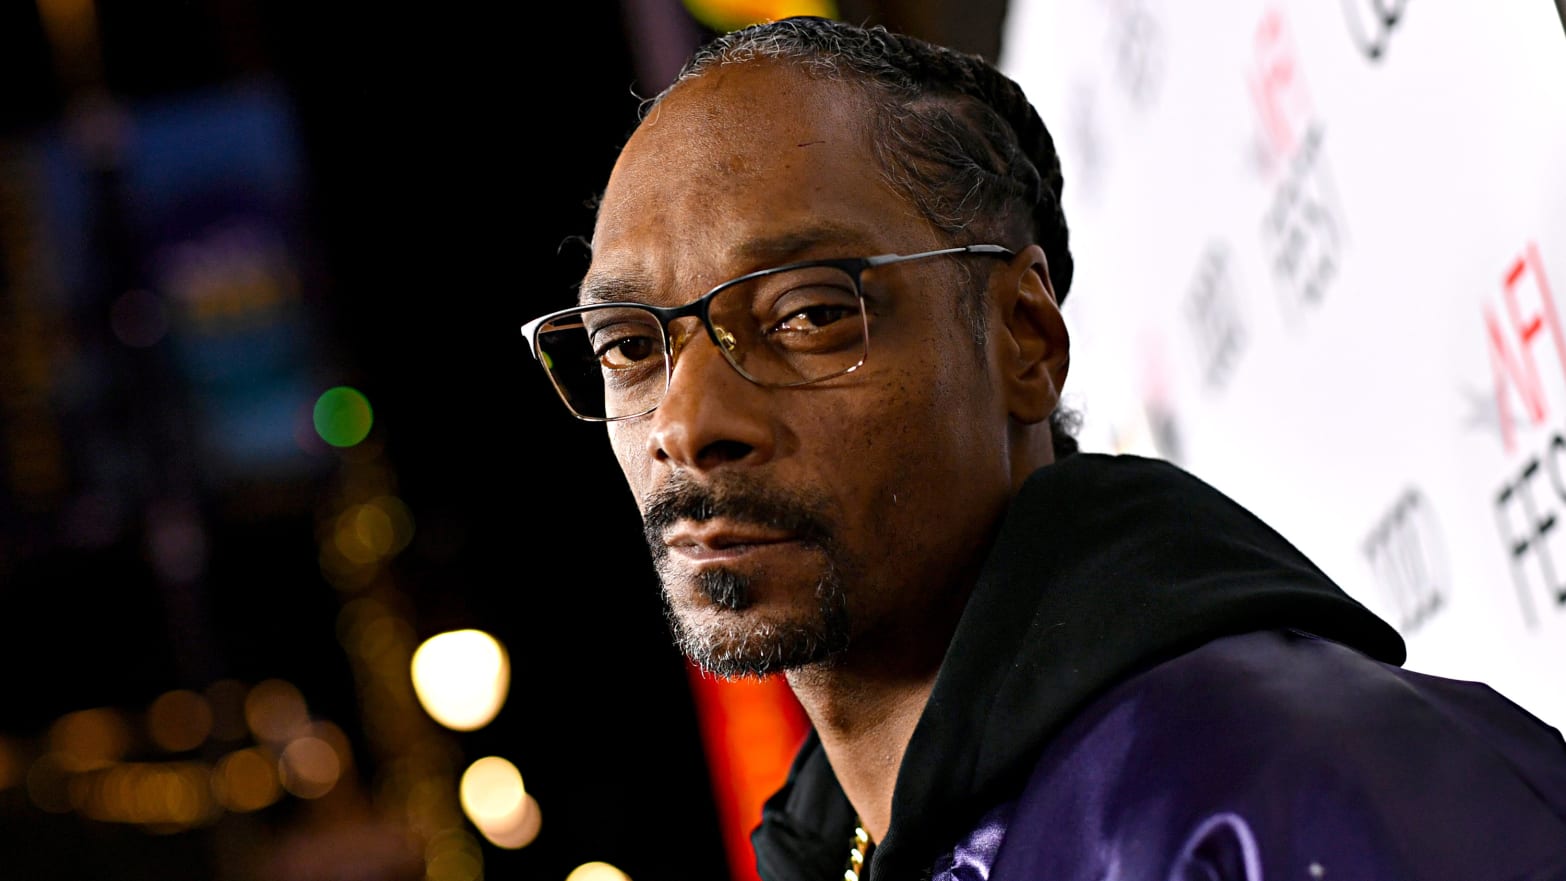 Snoop Dogg says he did not threaten Gayle King